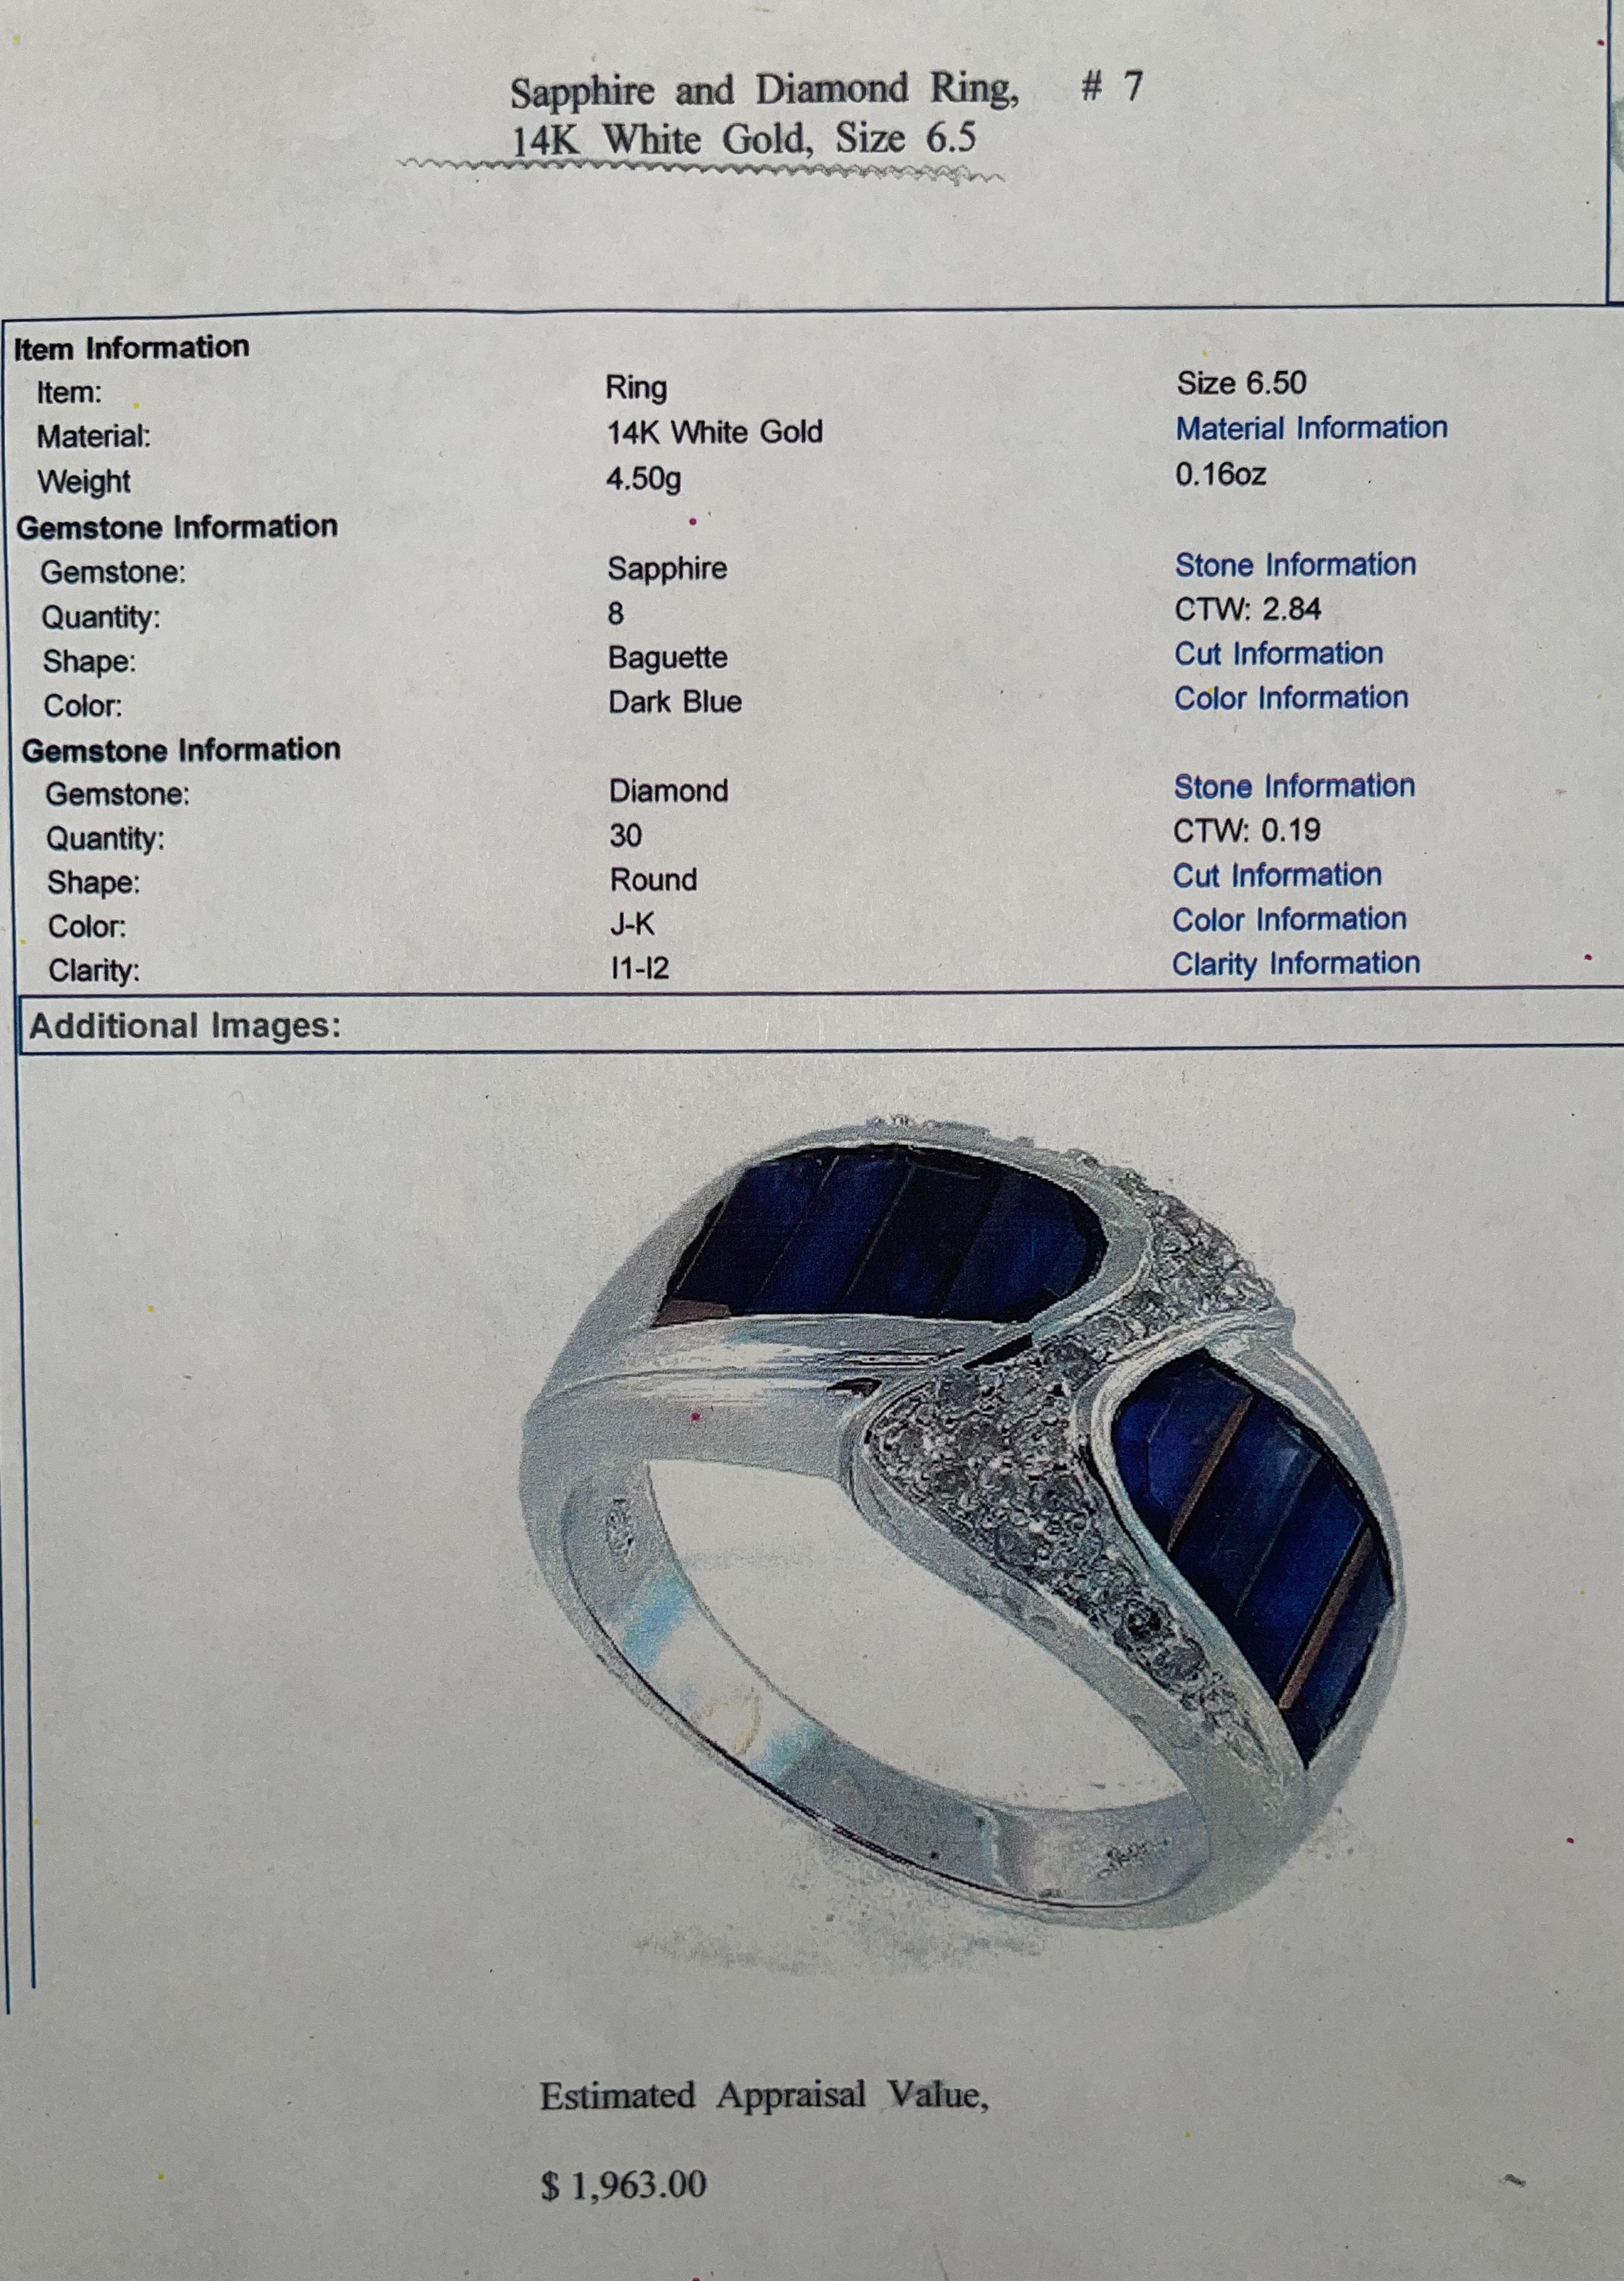 Sapphire and Diamond Ring, 14K White Gold, Size 6.5